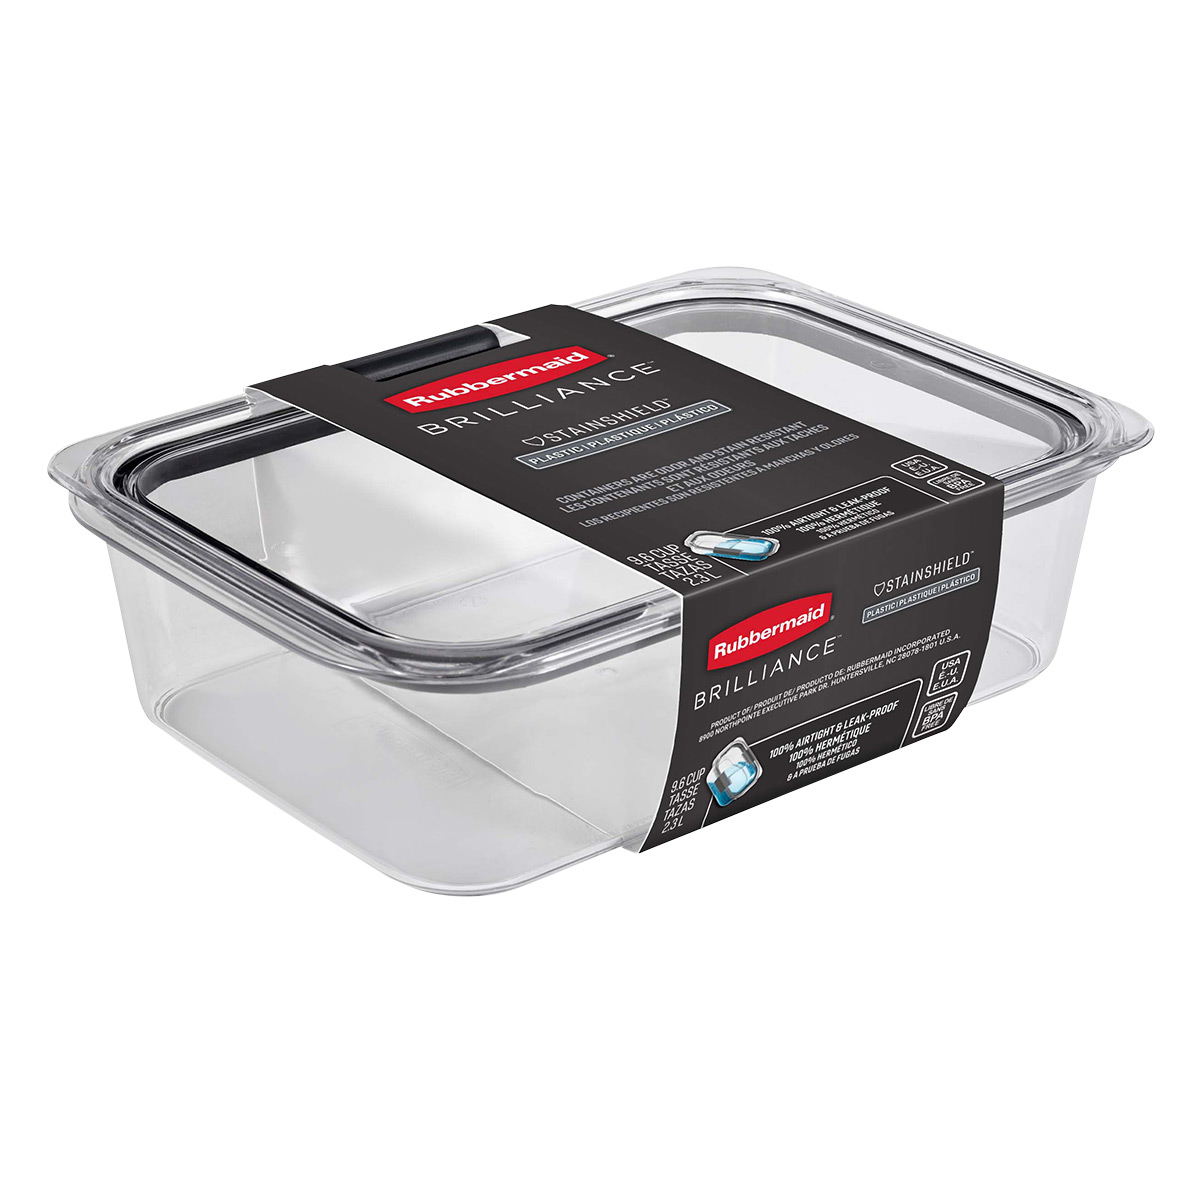 https://www.containerstore.com/catalogimages/498220/10096074-2183415_01-rubbermaid-ven.jpg